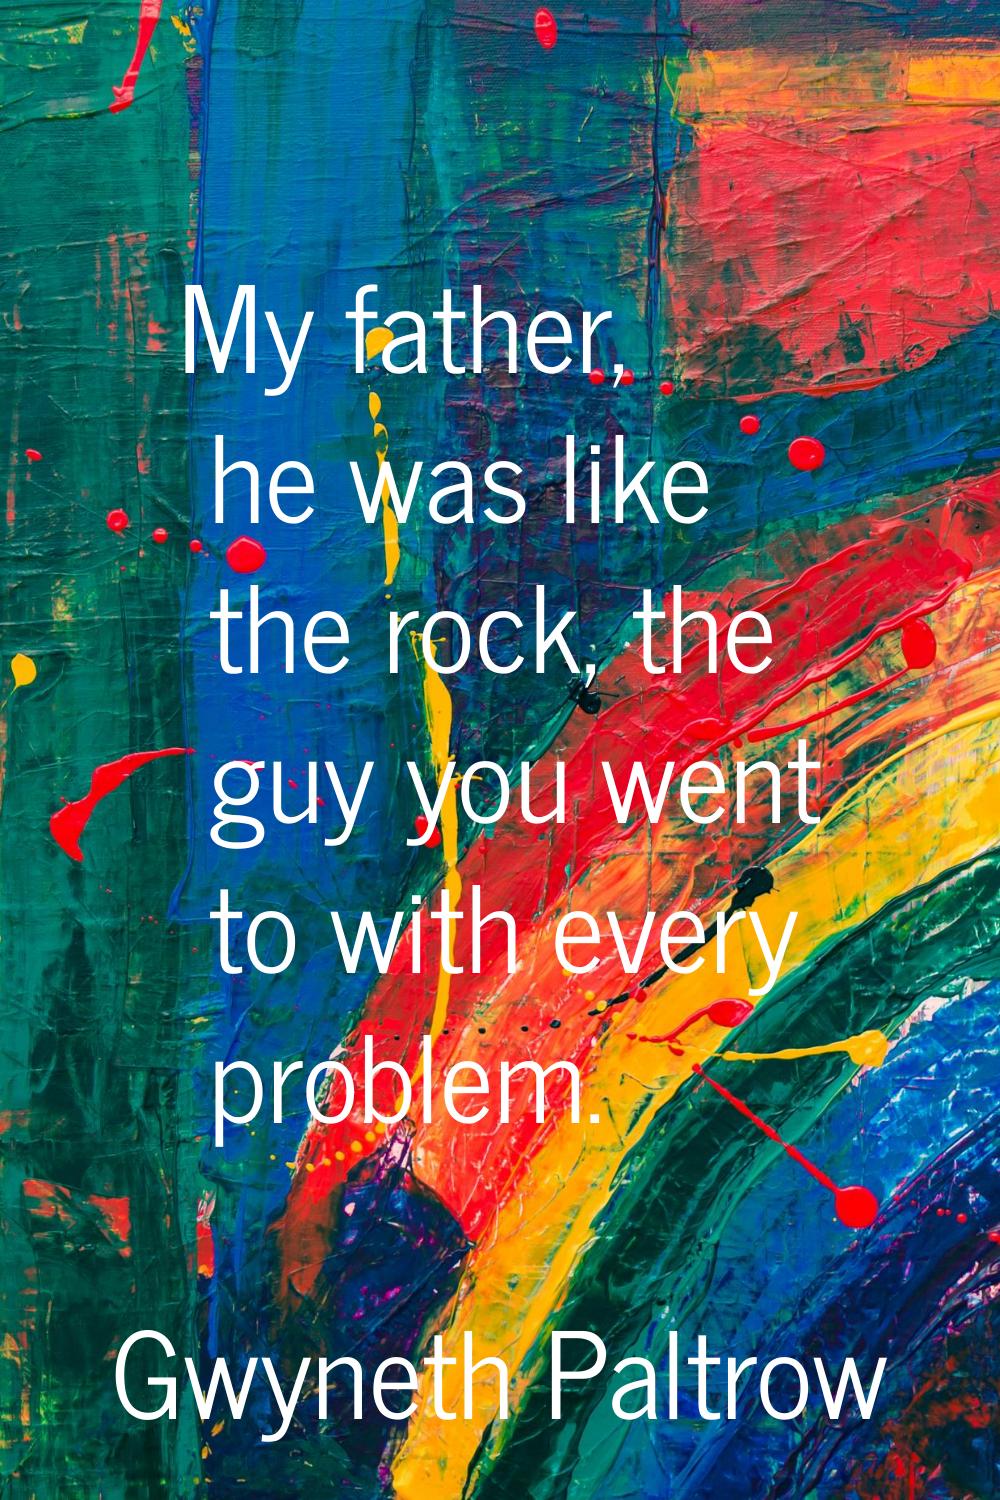 My father, he was like the rock, the guy you went to with every problem.